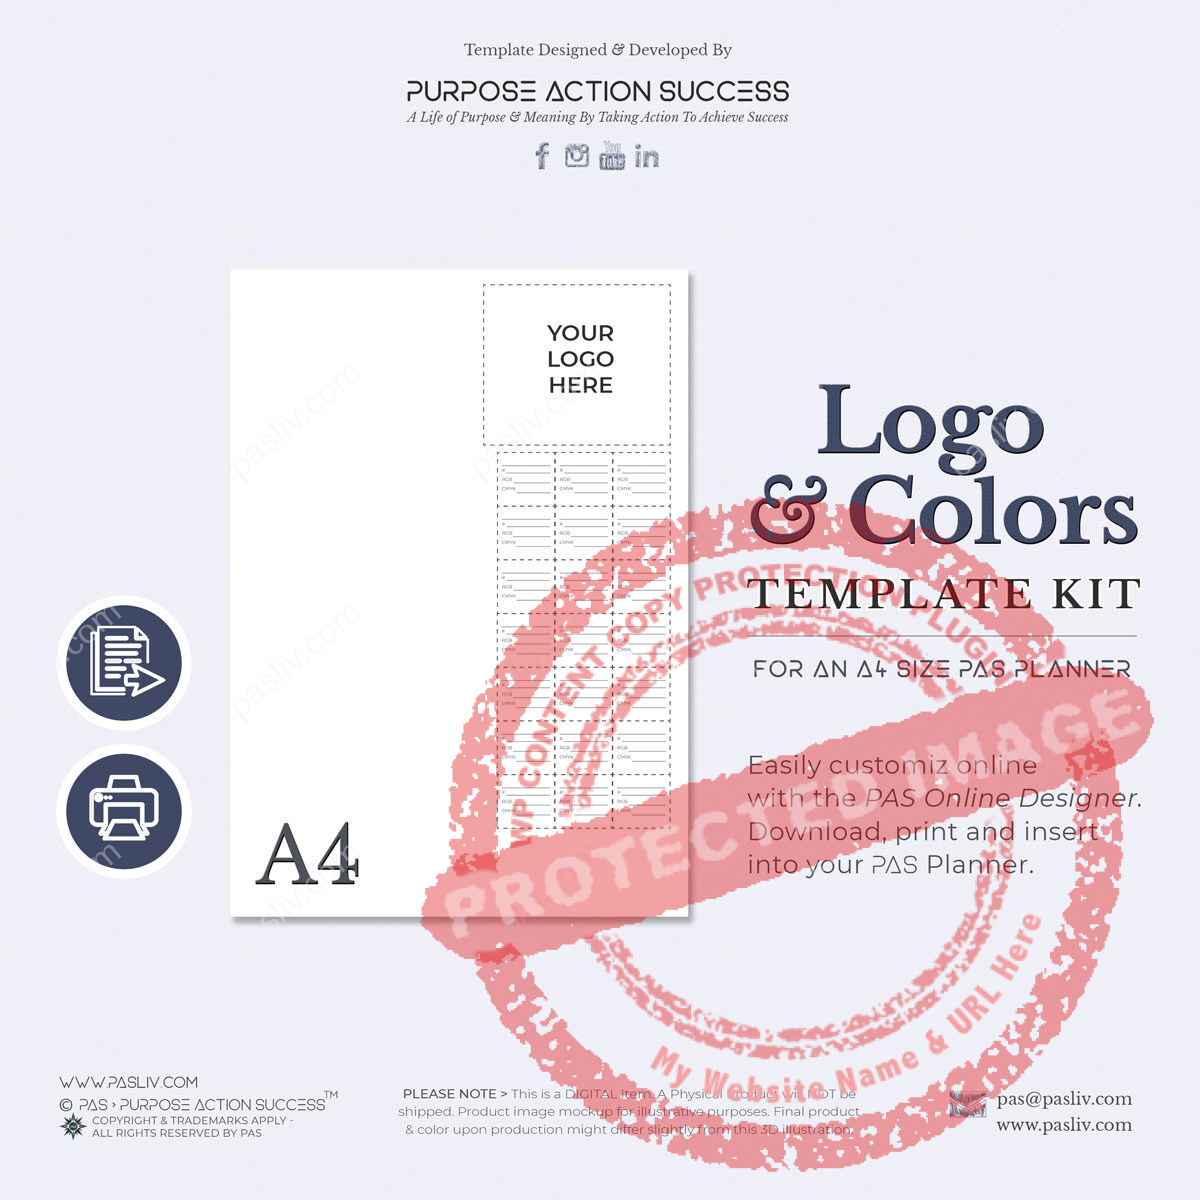 A4 PAS Planner 2023 Brand Template Insert - Copyright & Trademarks Apply - All Rights Reserved PAS > Purpose Action Success